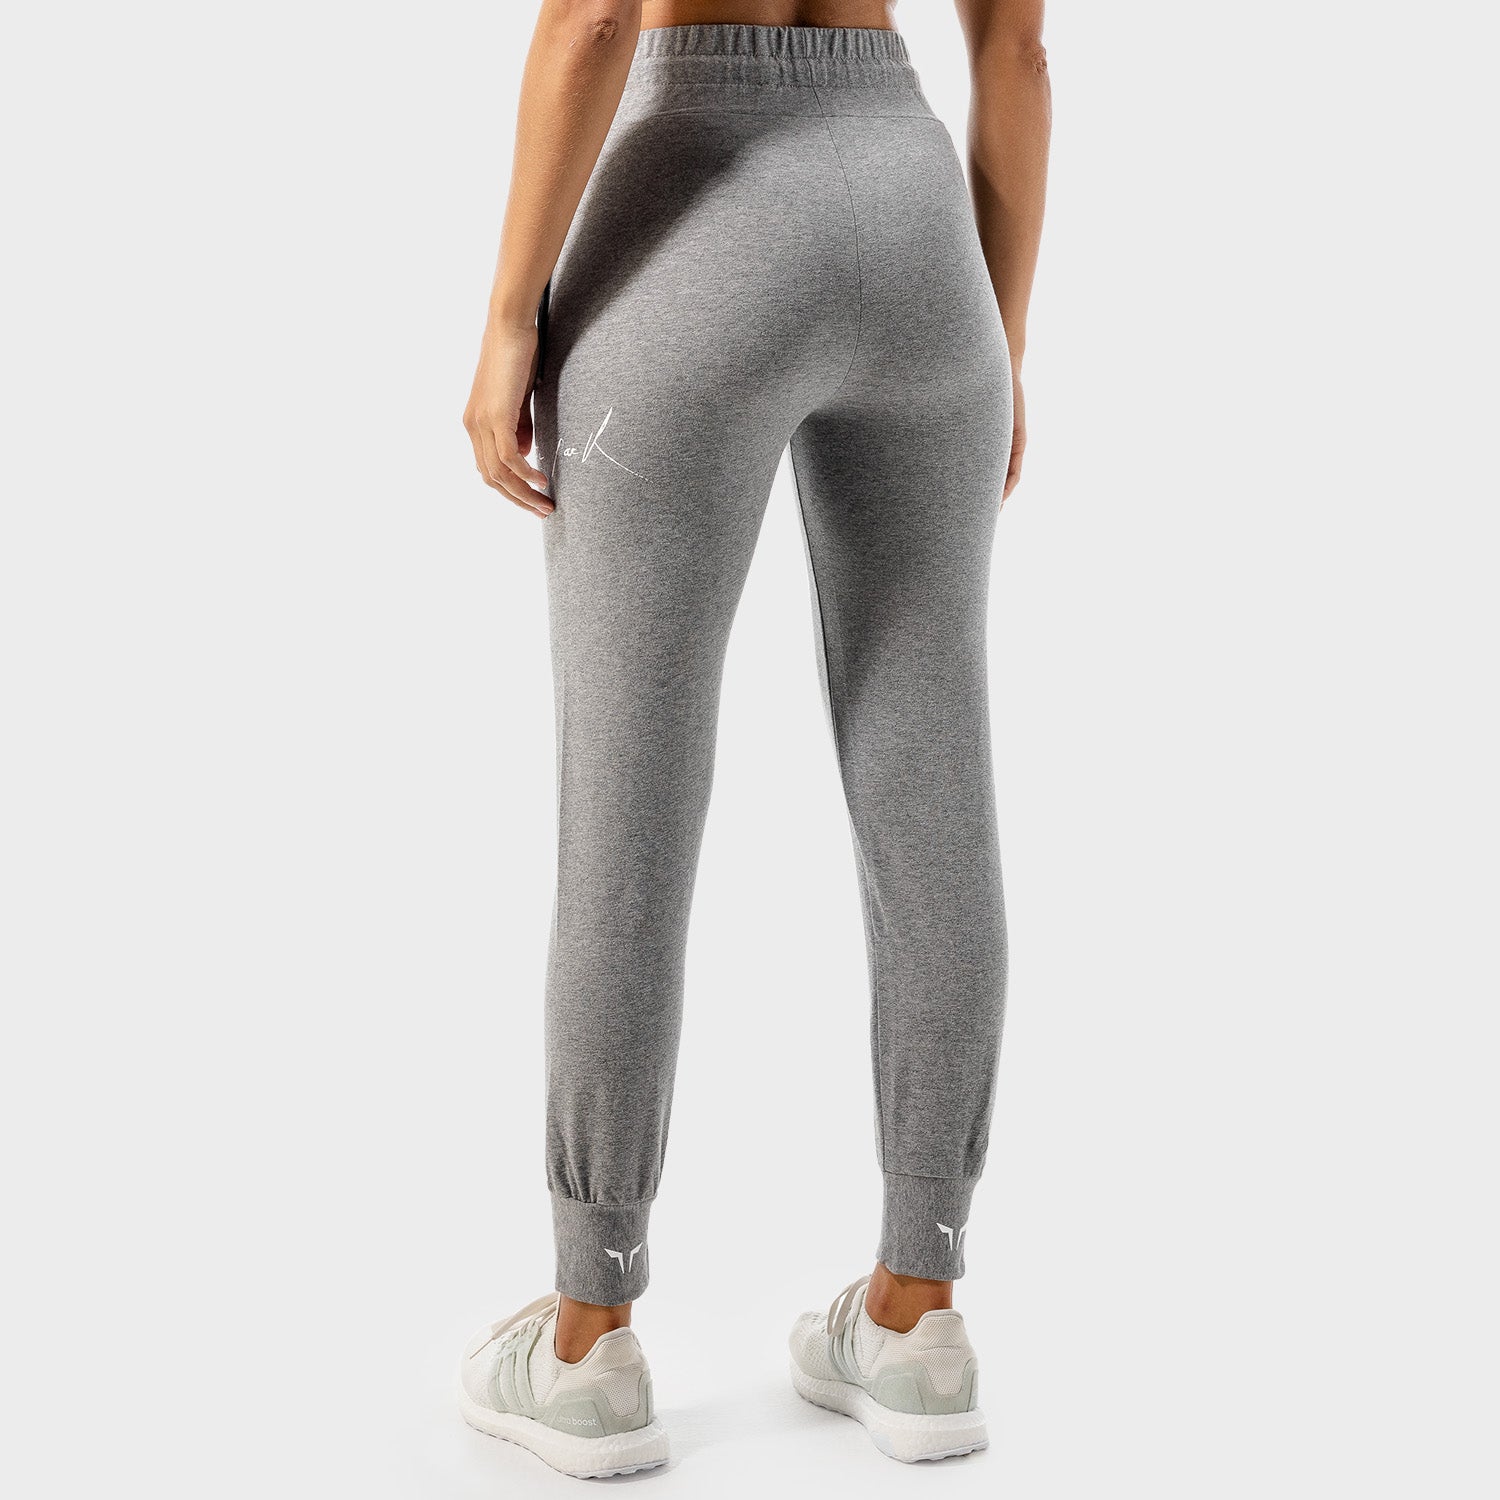 squatwolf-gym-pants-for-women-vibe-joggers-grey-marl-workout-clothes